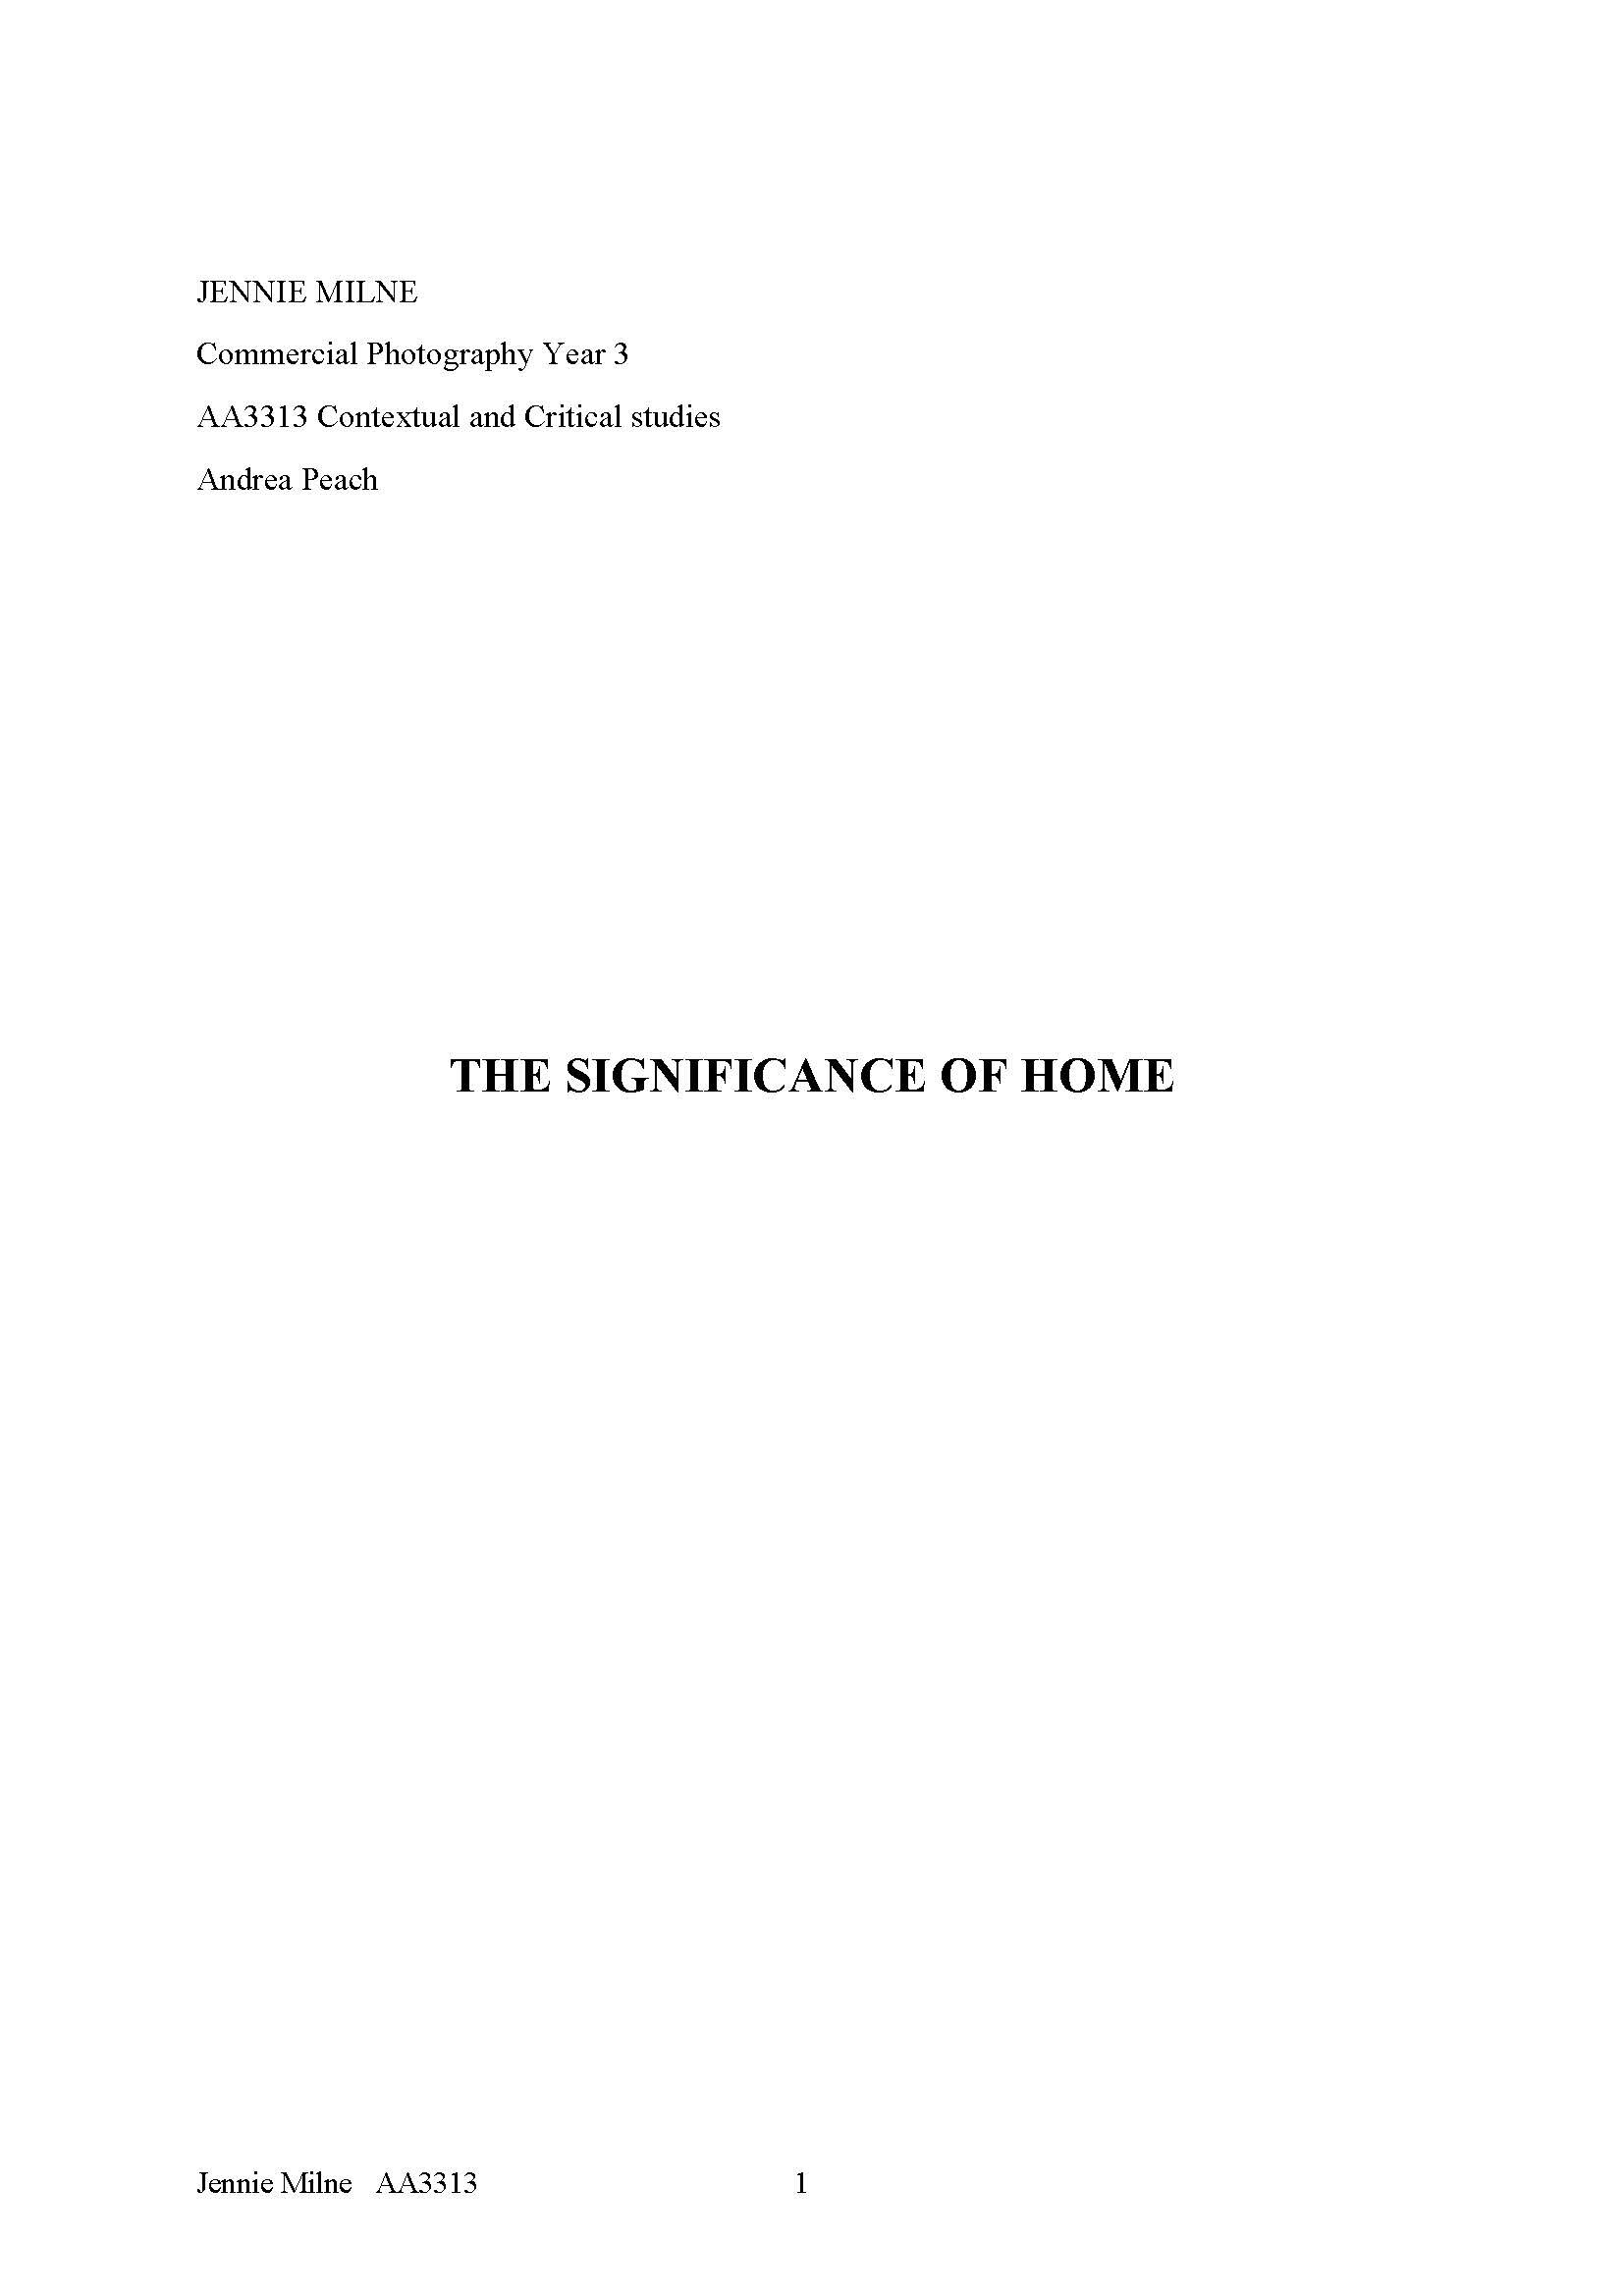 The Significance of Home Jennie Milne_Page_01.jpg